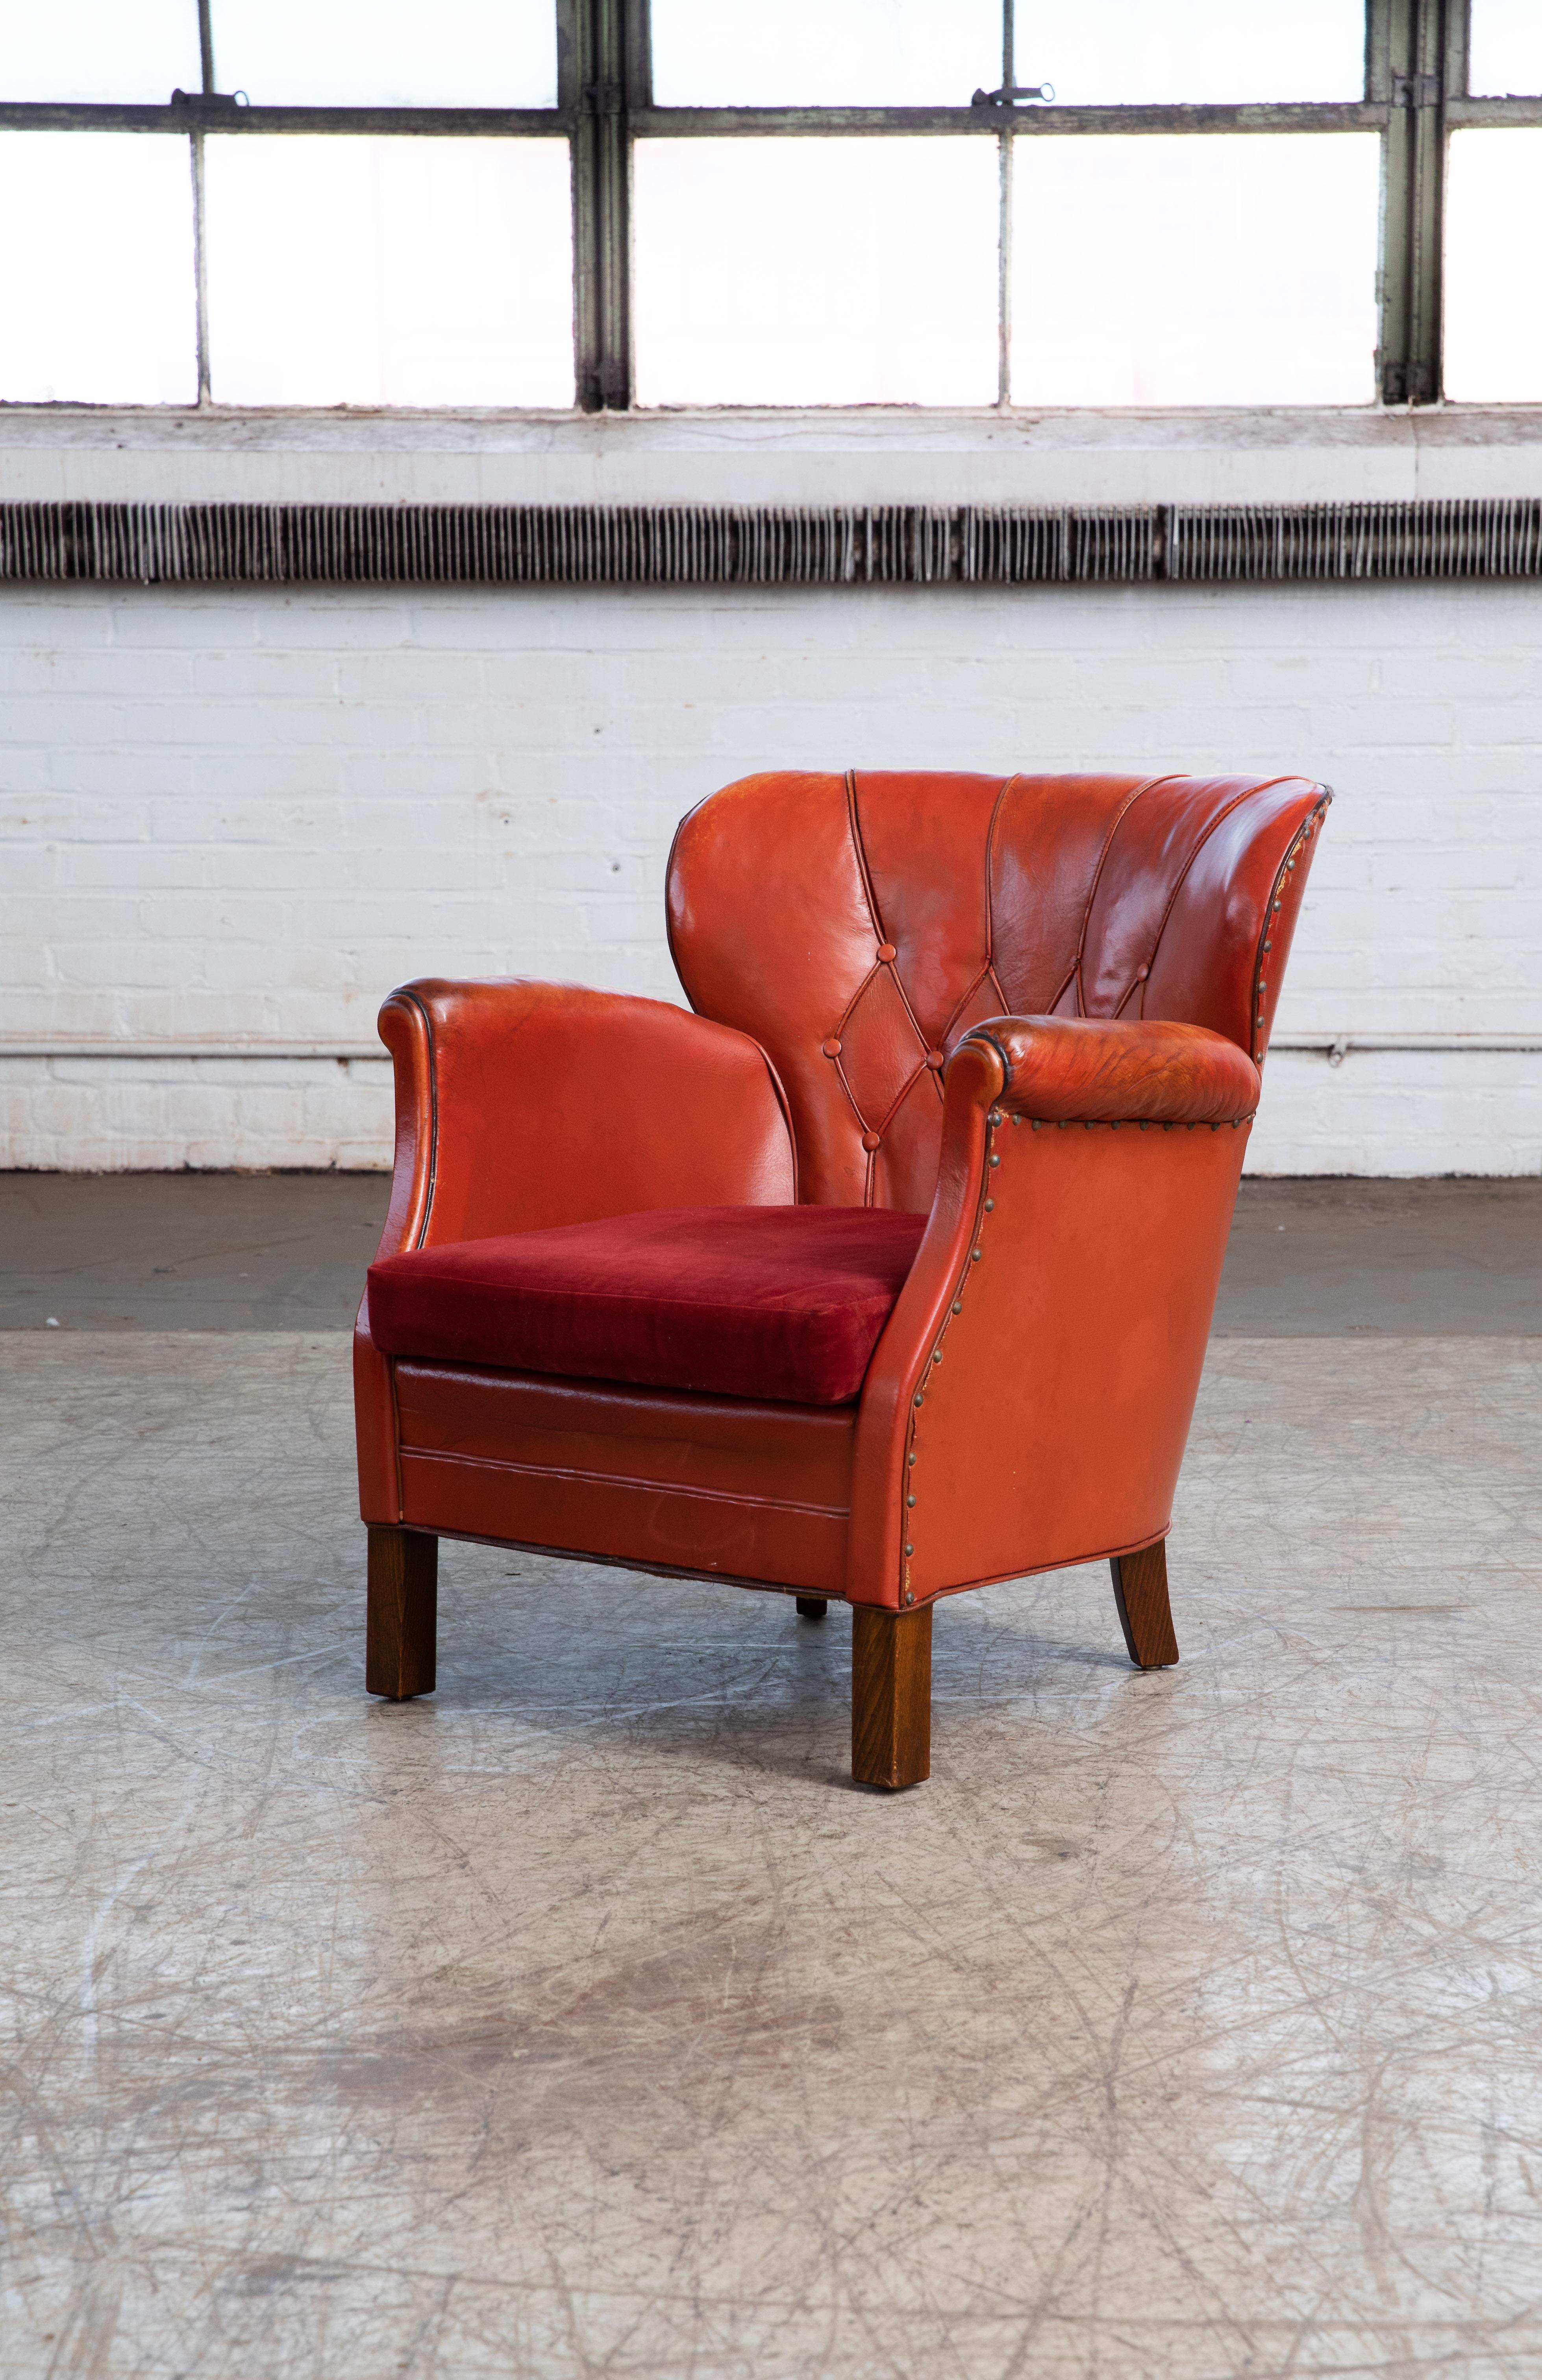 Charming small scale Danish club chair made by Danish furniture maker Oskar Hansen around the mid-1930s. Covered in original red brown leather with a smooth back. Unusually good condition for its age and use with perfect amounts of noble patina and